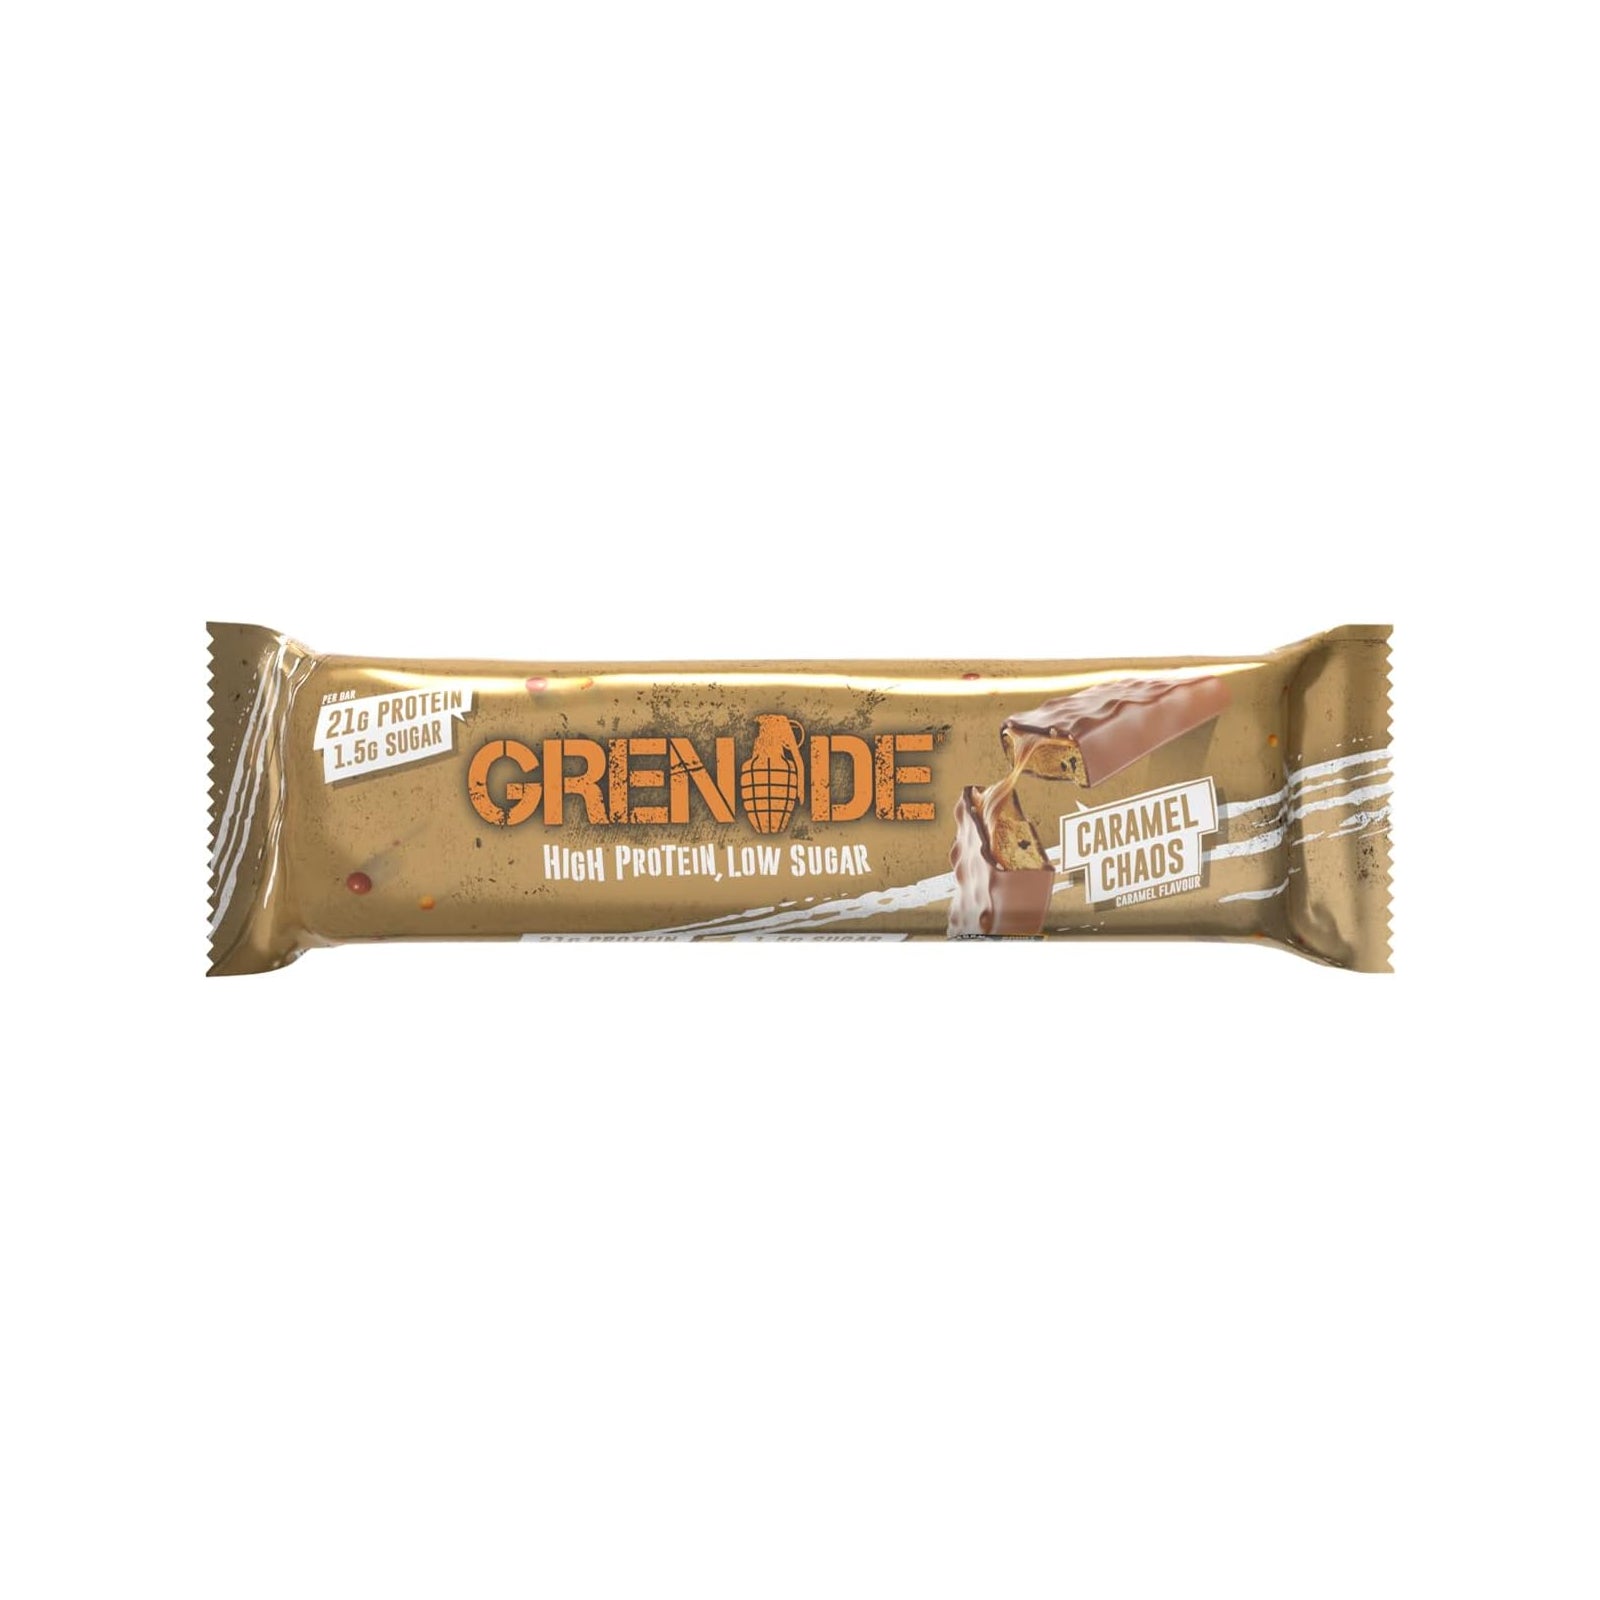 Grenade Protein Bars Caramel Chaos / Pack of 12